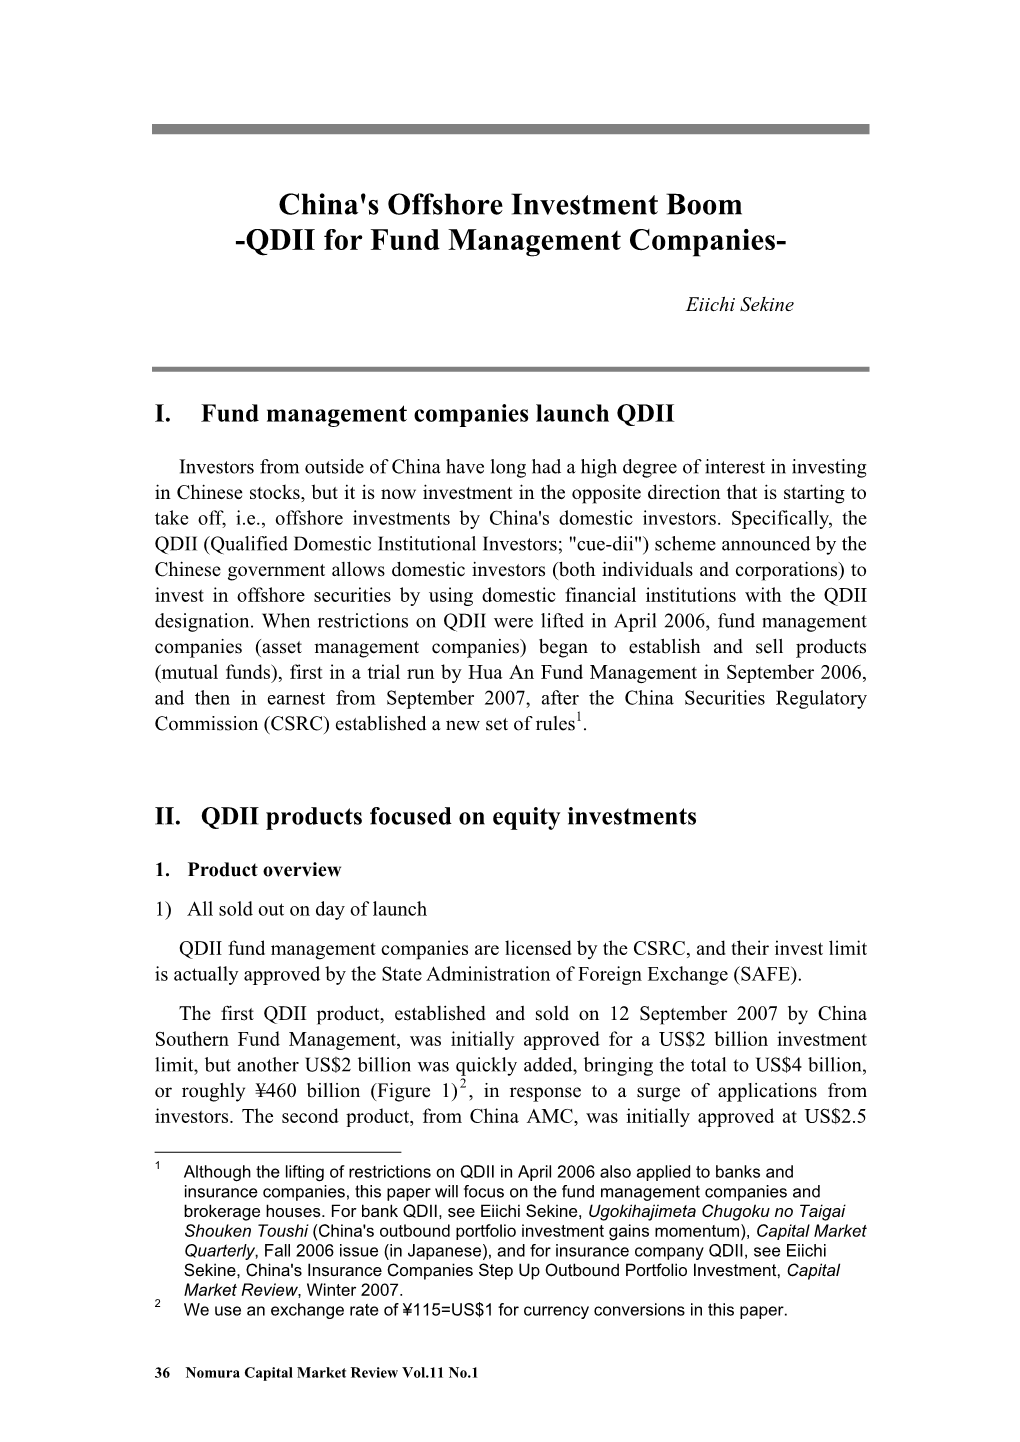 QDII for Fund Management Companies